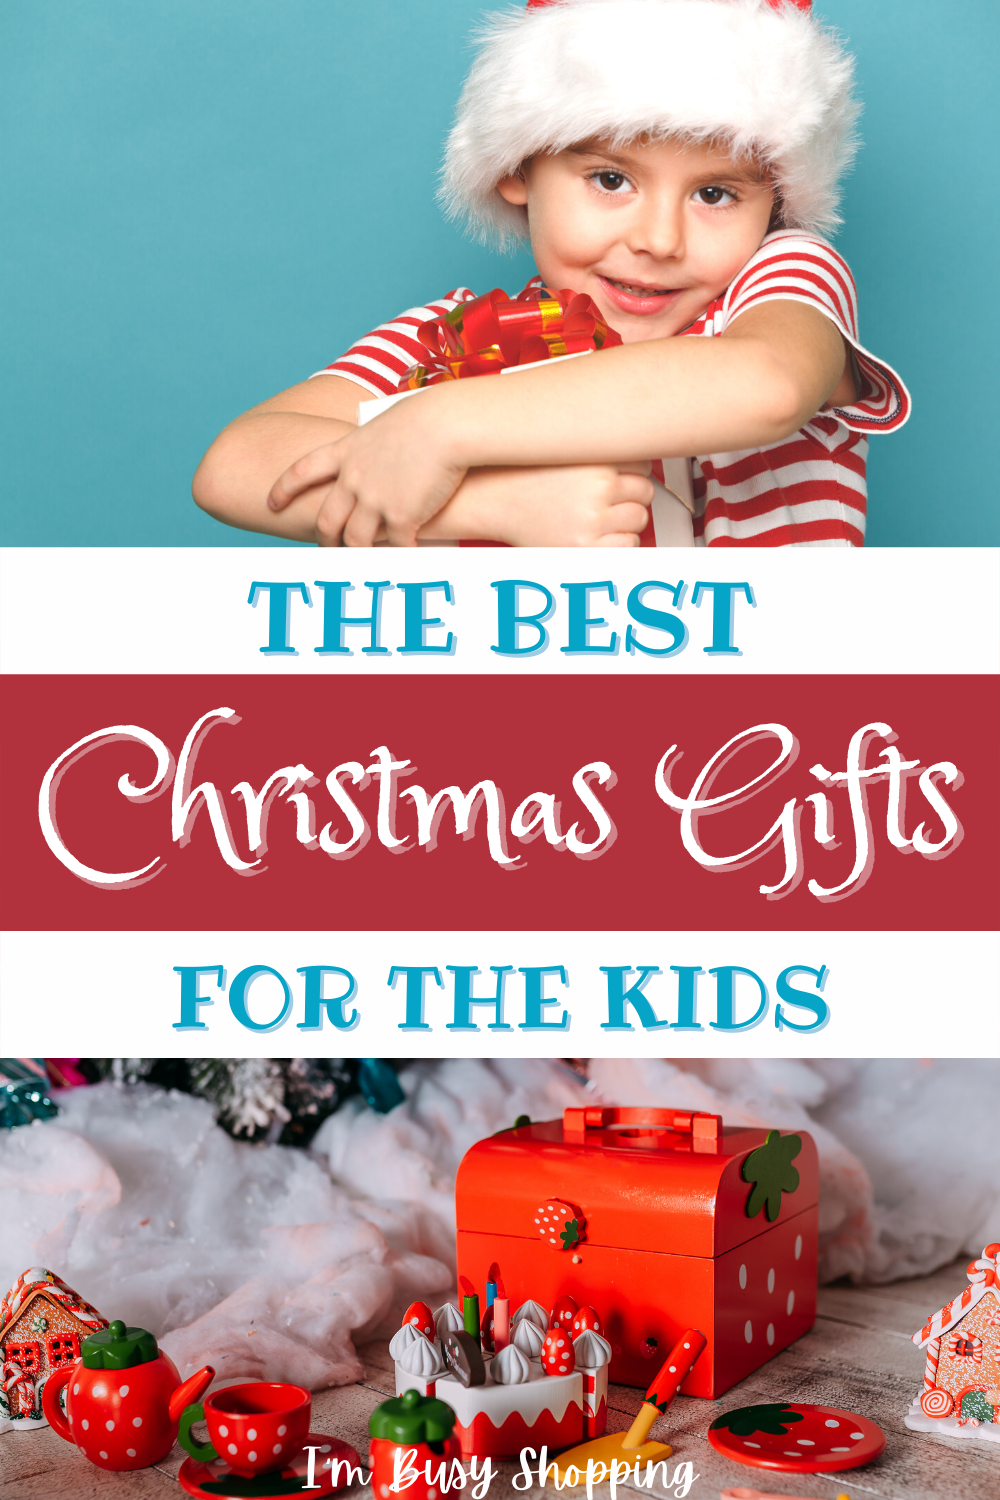 Pin showing the title The Best Christmas Gifts for Kids